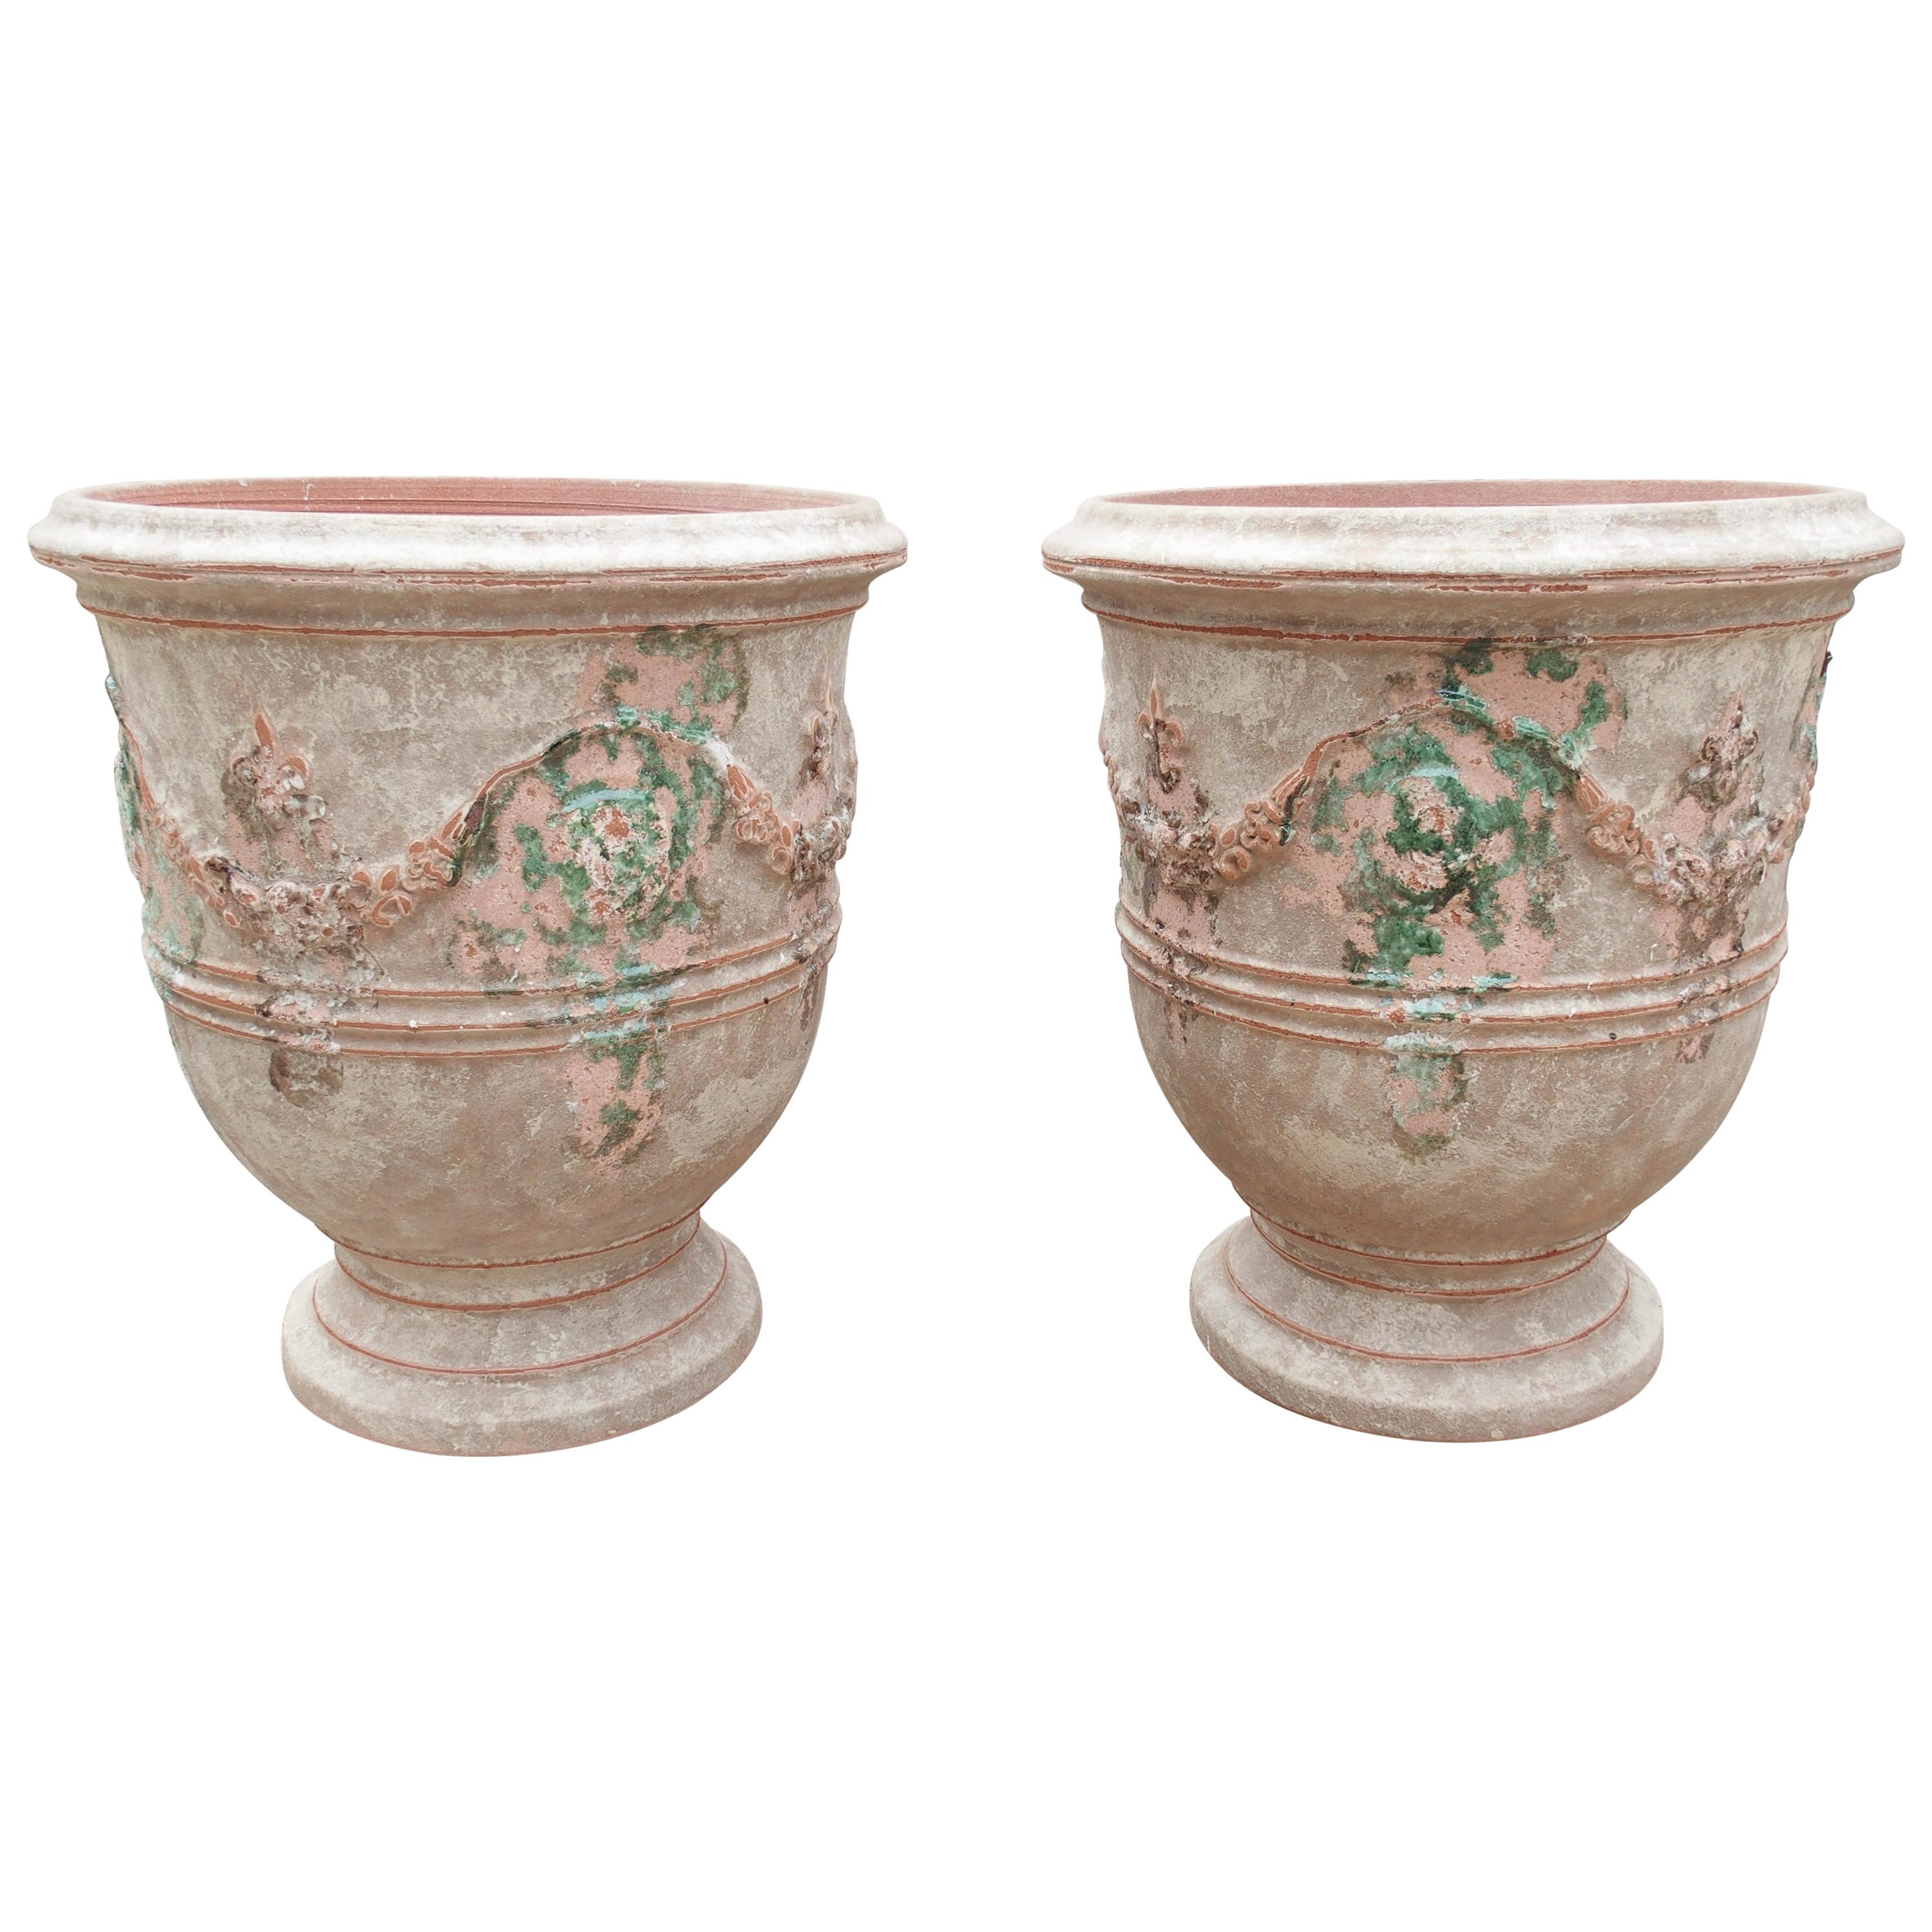 Pair of Antiqued Classic Fleur-de-Lis Anduze Pots from France at 1stDibs